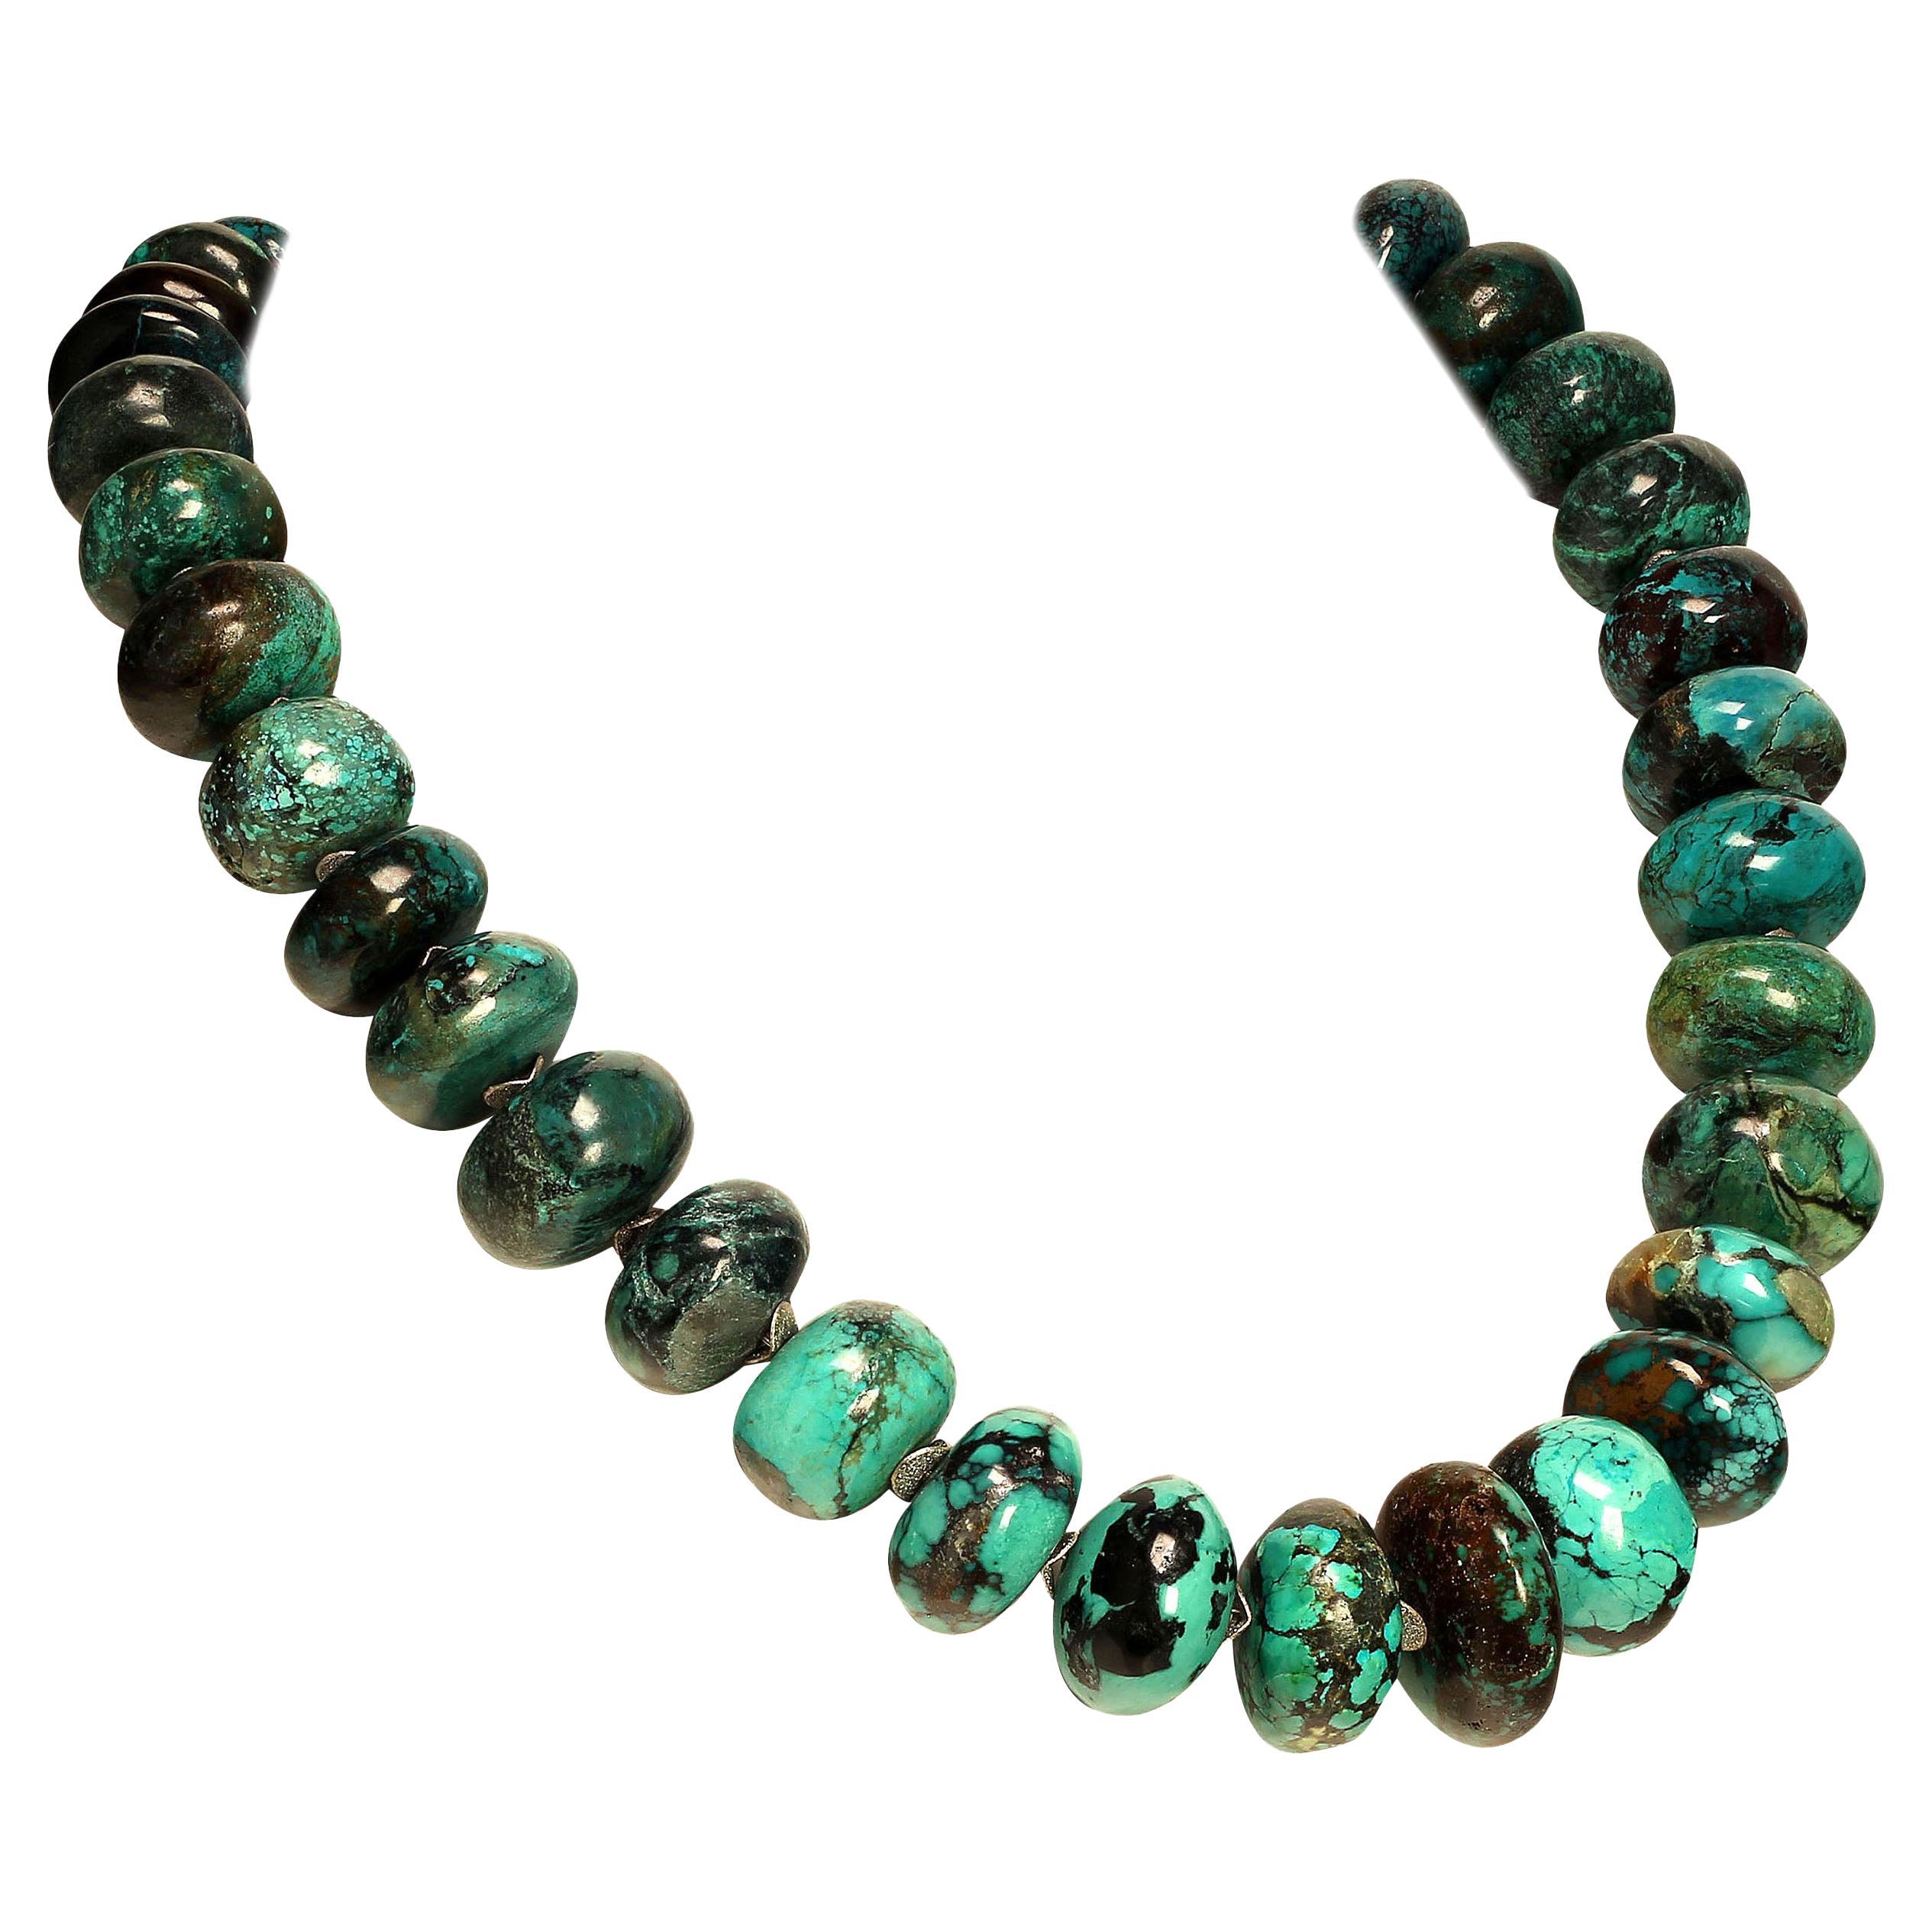 AJD 21 Inch Graduated Turquoise Rondelles with Silver Tone Flutters Necklace